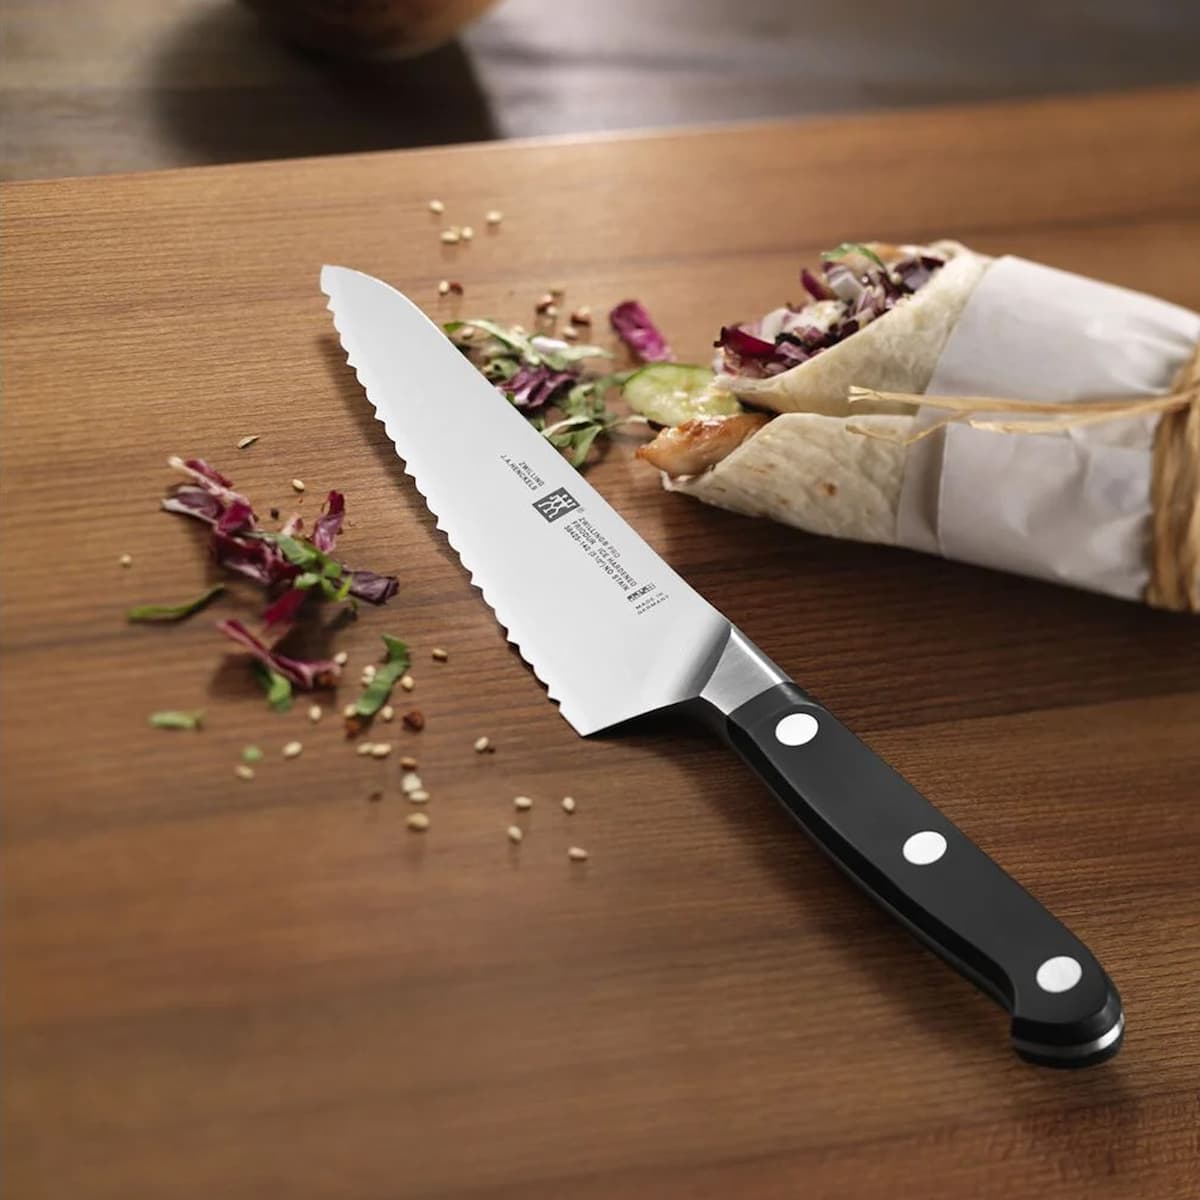 Buy Zwilling Pro Chef's Knife 14 cm from Zwilling